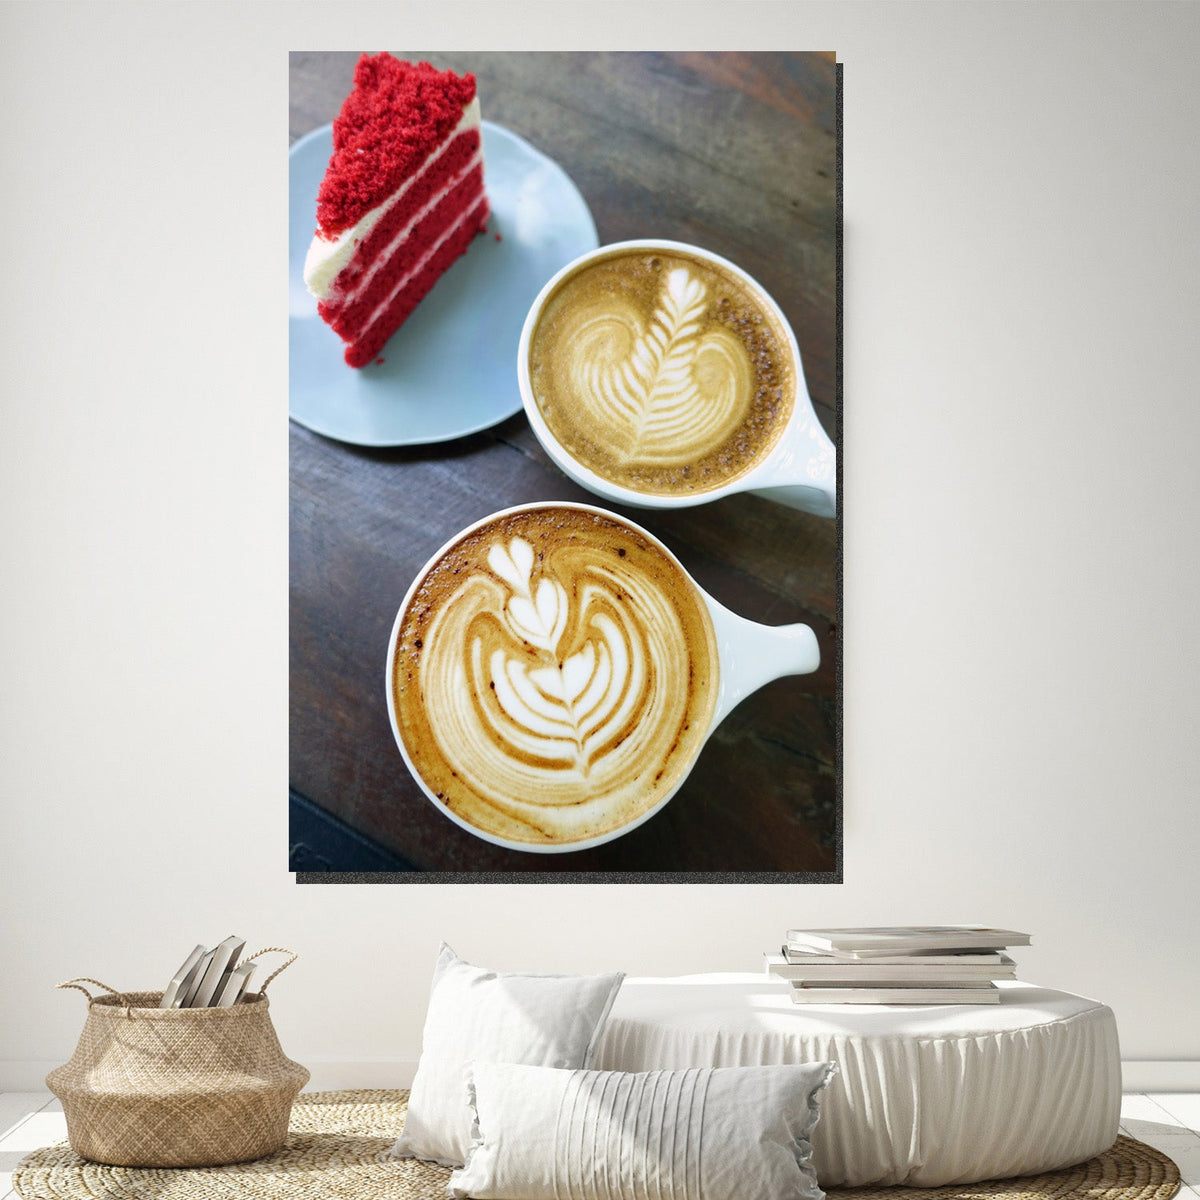 https://cdn.shopify.com/s/files/1/0387/9986/8044/products/CoffeeandCakeCanvasArtprintStretched-3.jpg